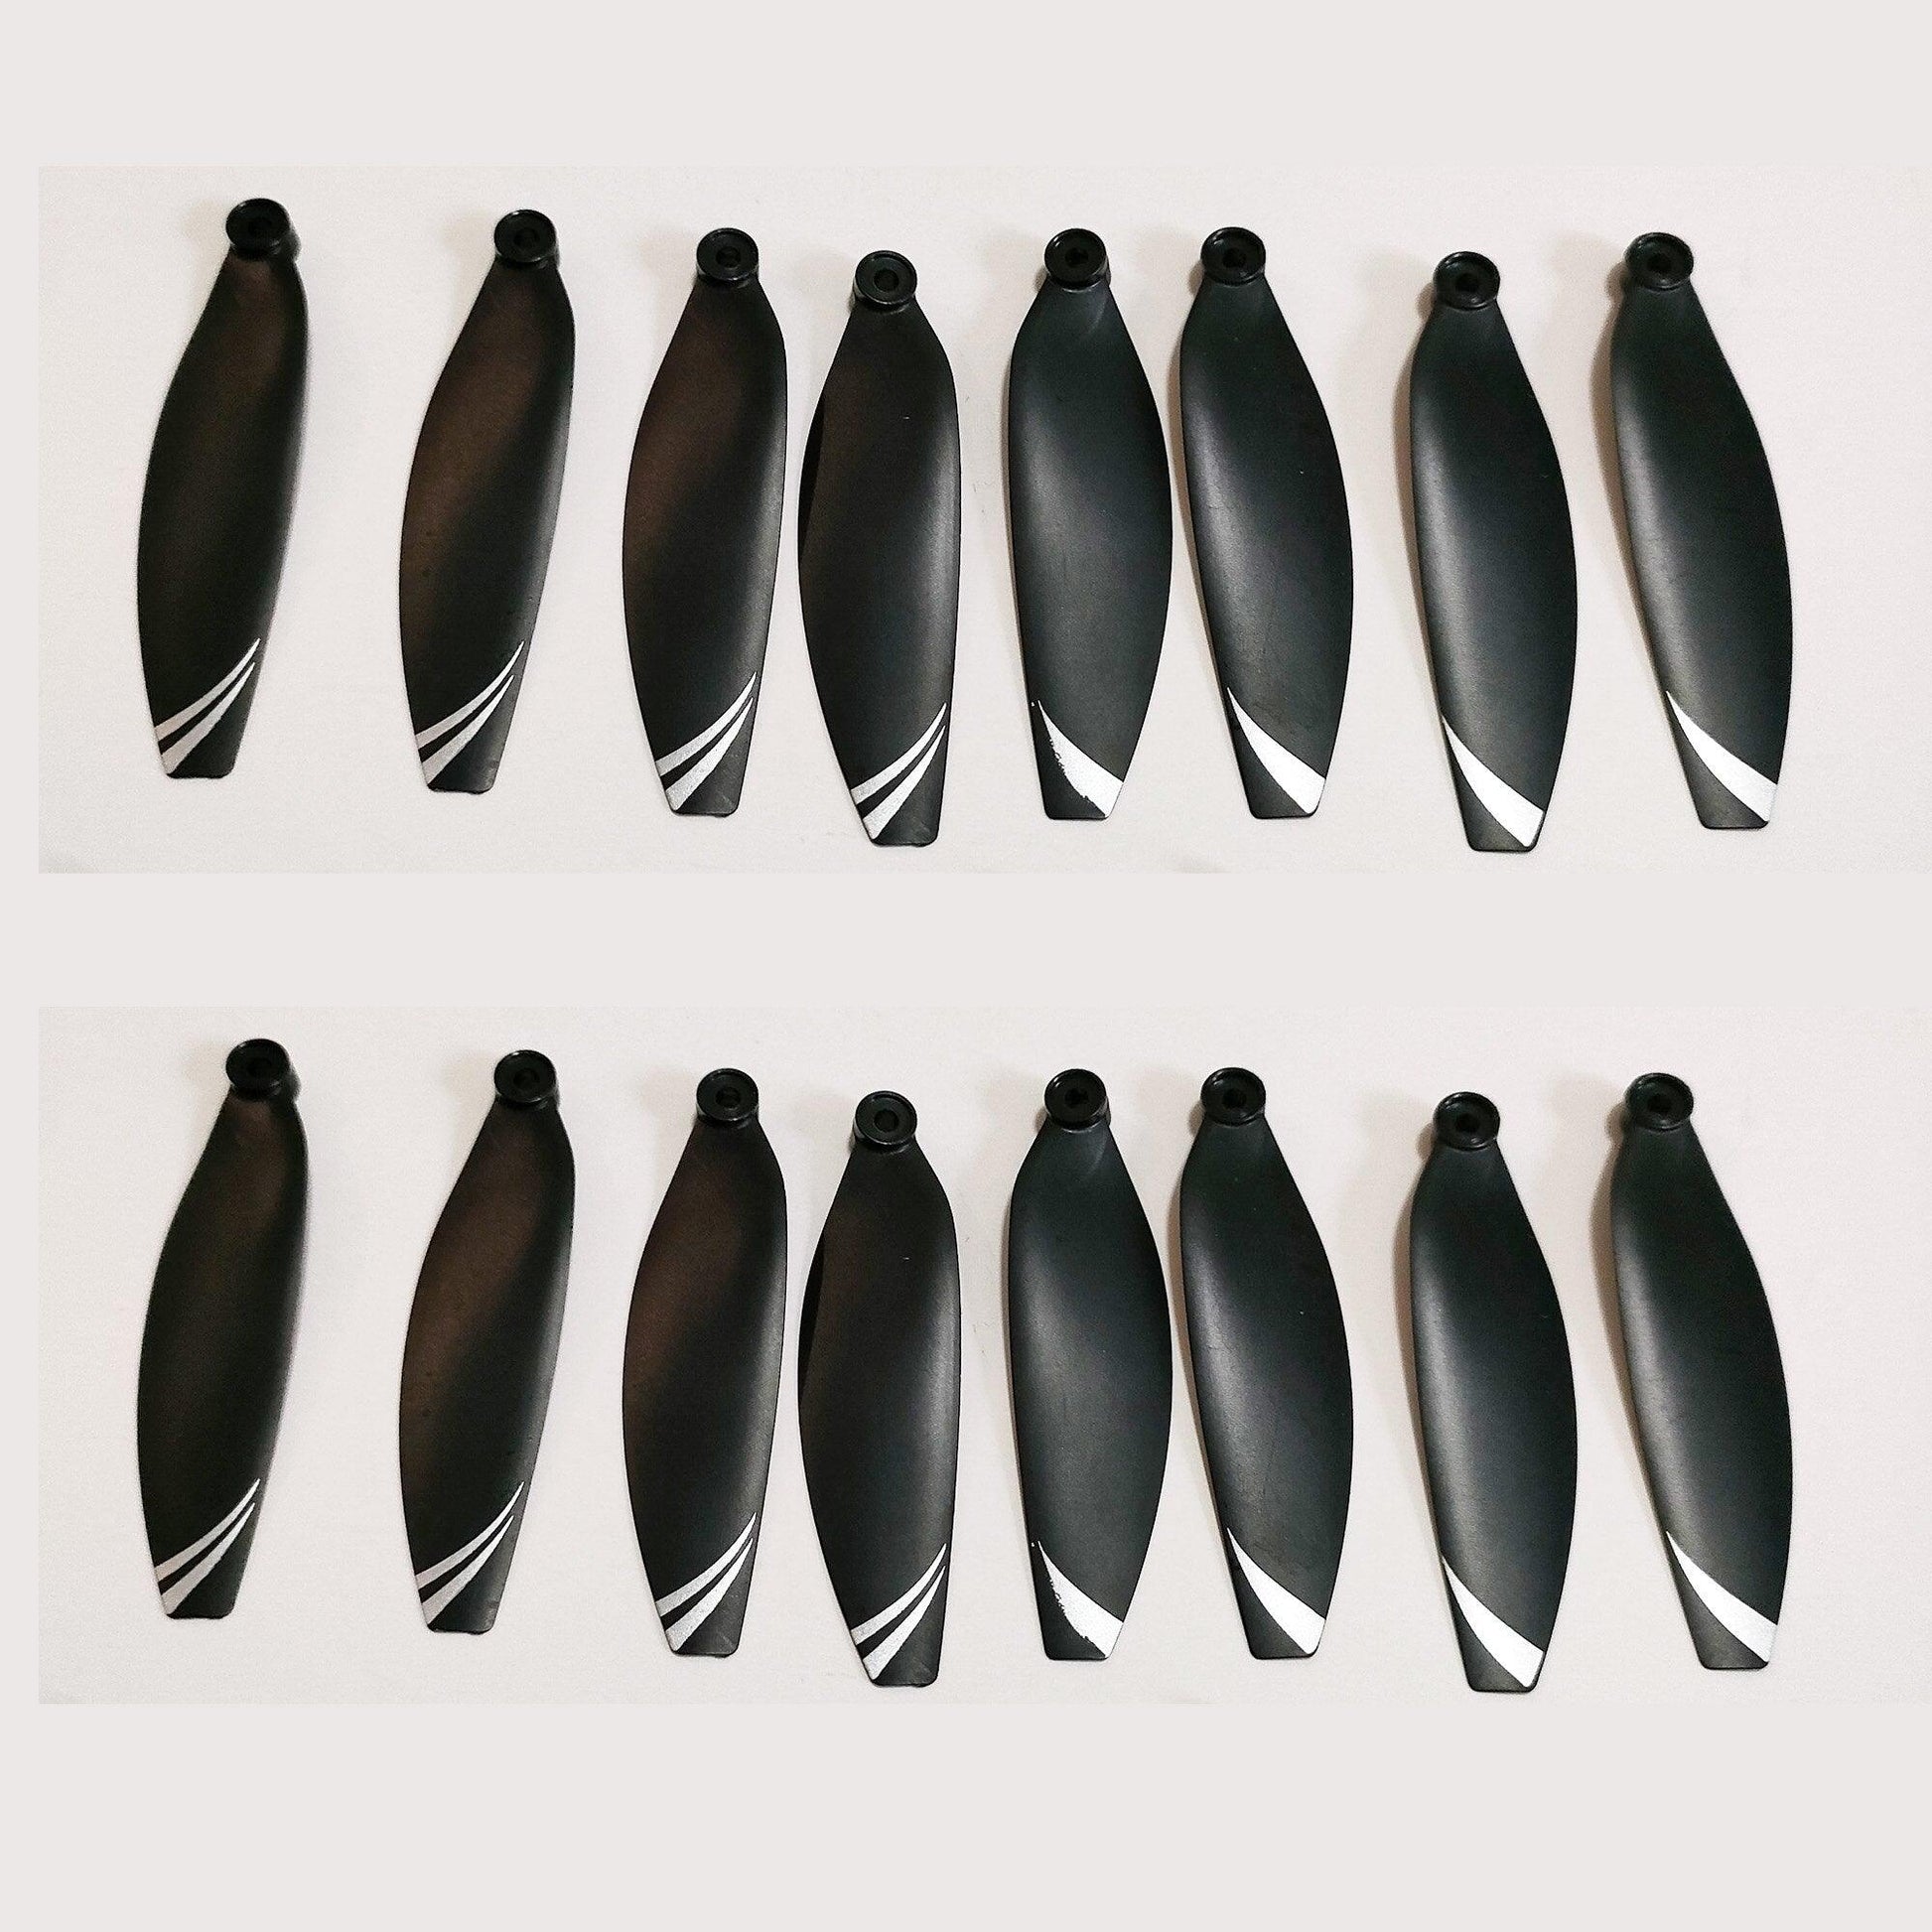 JJRC X16 CW CCW Propeller - Blade Spare Part X16 RC GPS Drone Wifi FPV Quadcopter Helicopter Original Rotor Fan Accessory - RCDrone